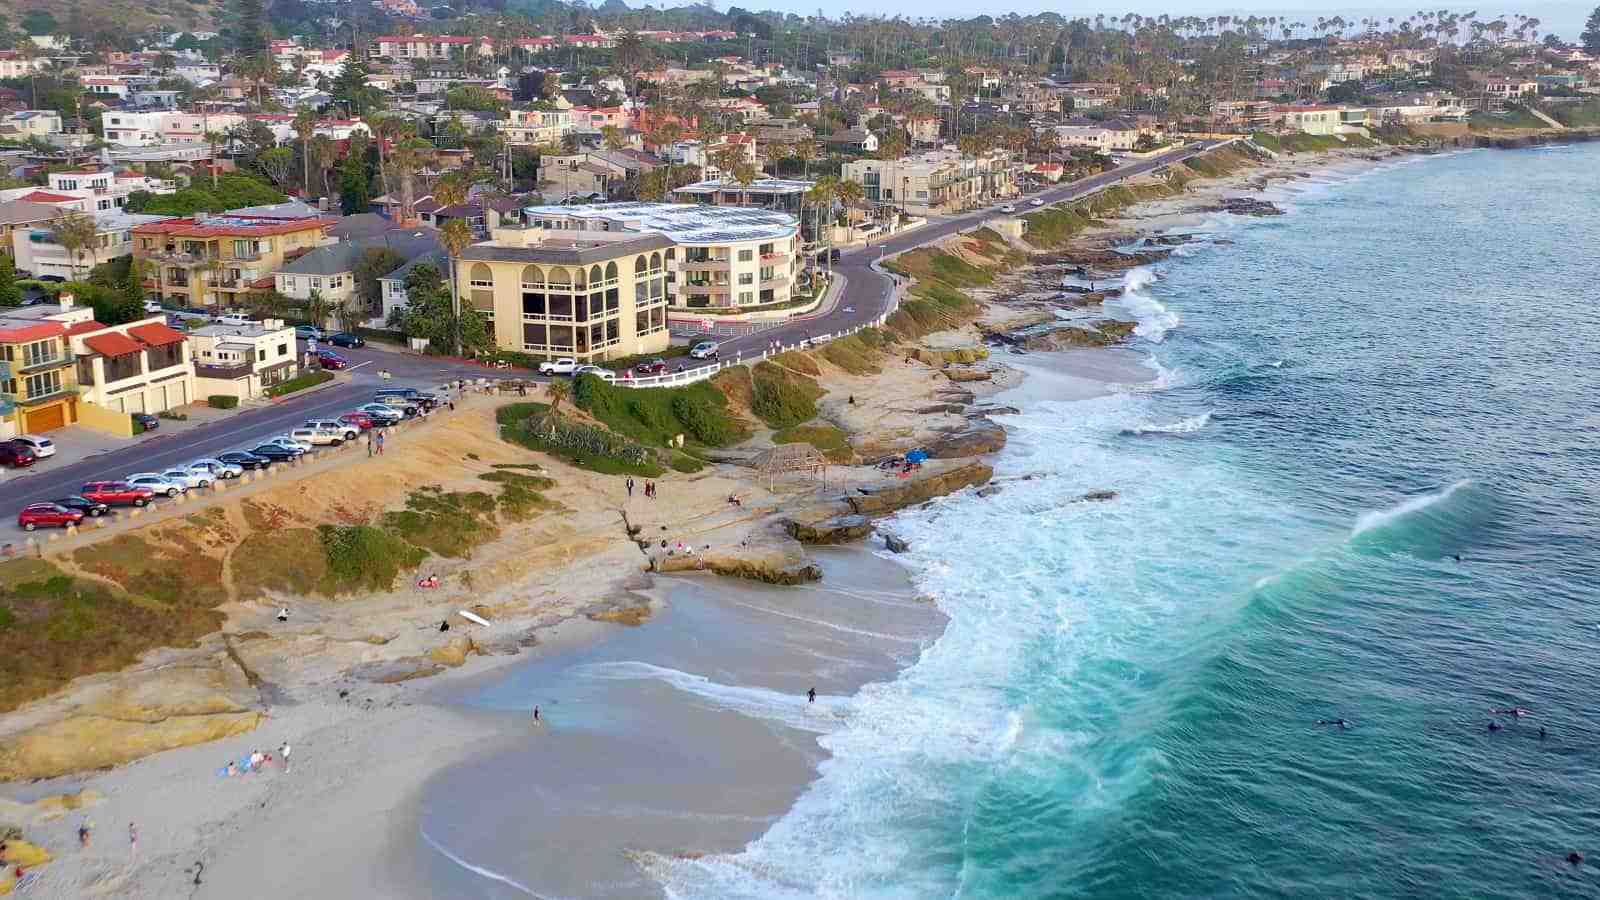 Is San Diego a safe place to visit?